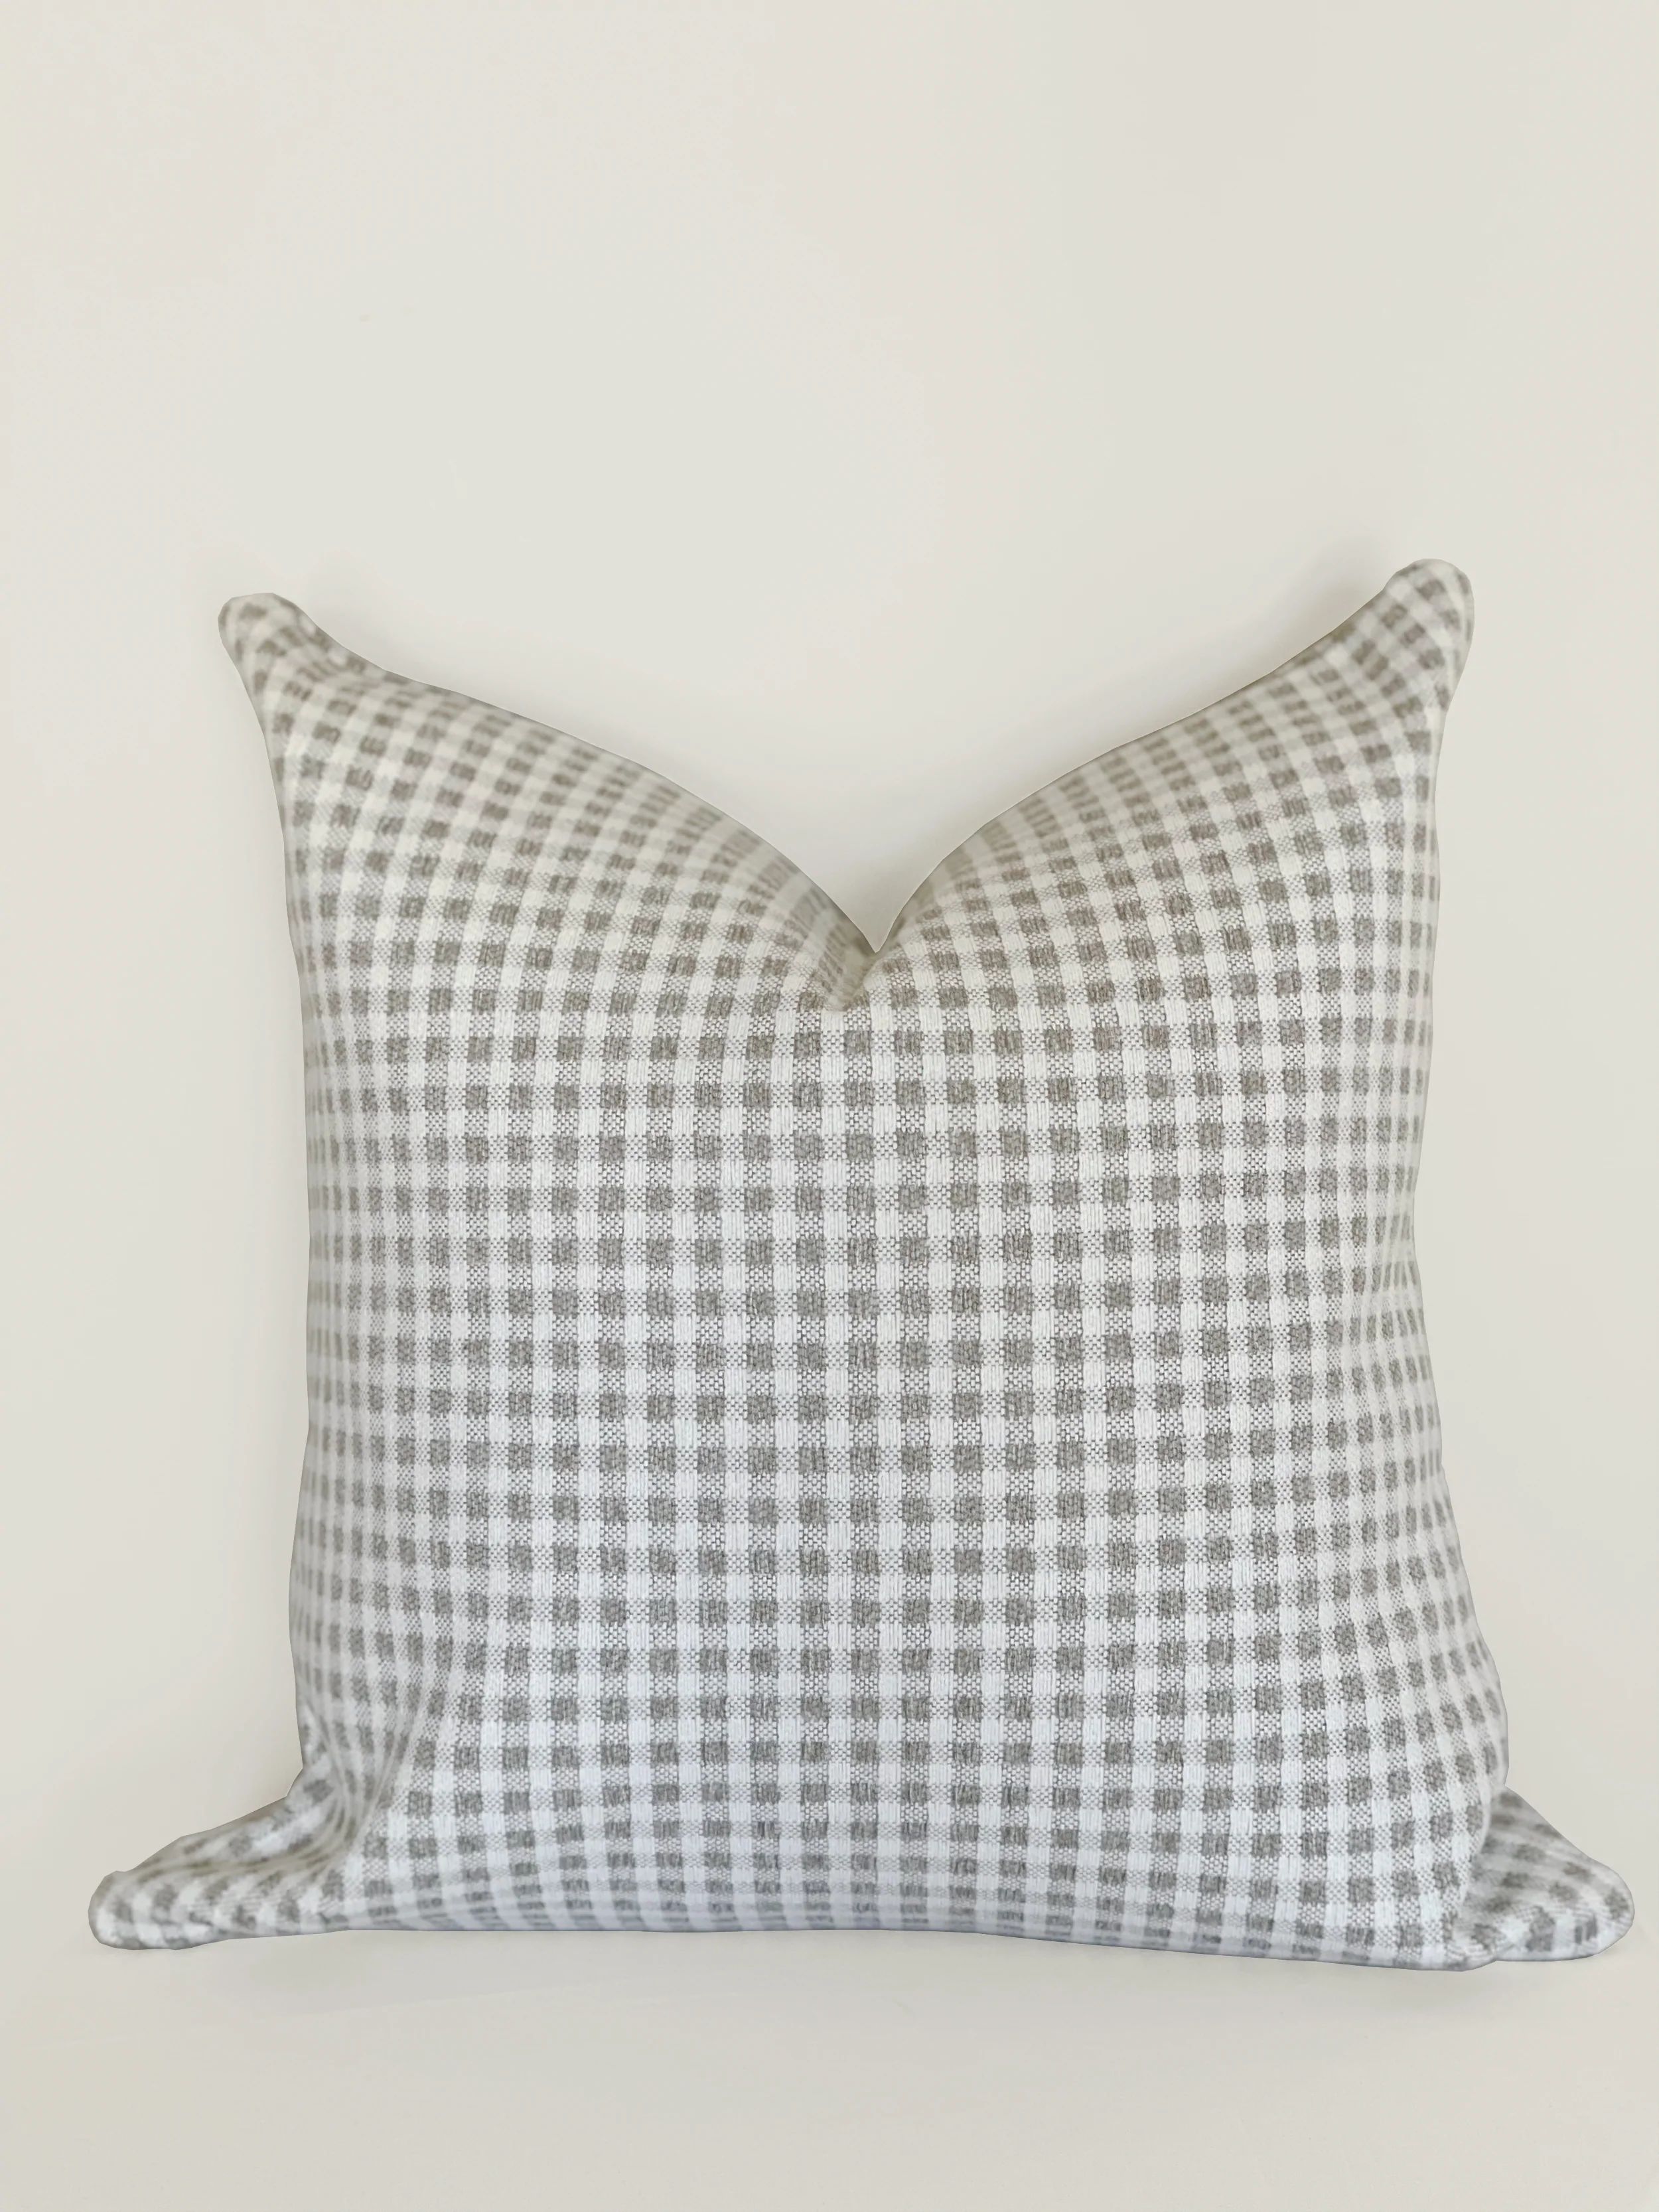 Little Gingham Woven Lumbar & Square Pillows | Handcrafted in Knoxville, TN | Cielle Home